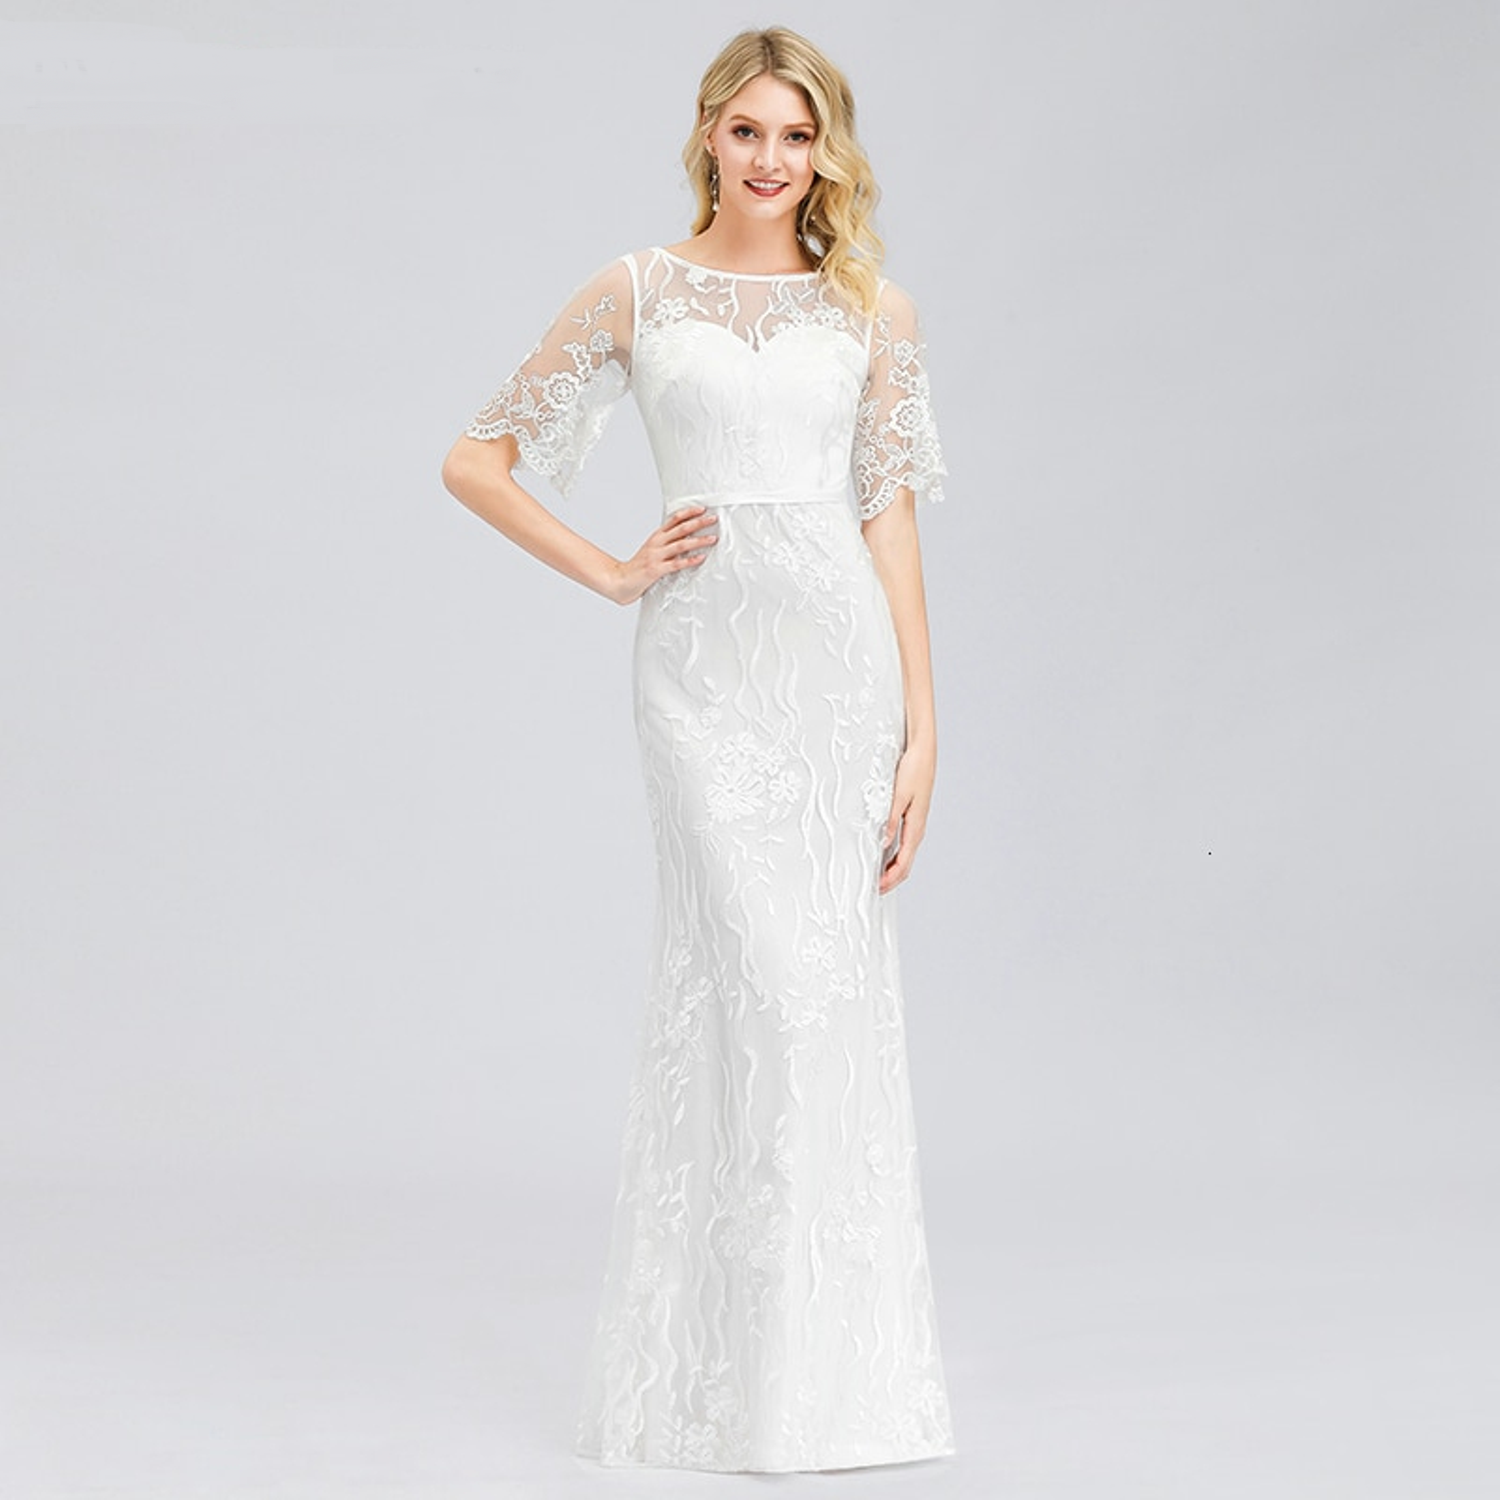 Lace wedding dress with flutter sleeves